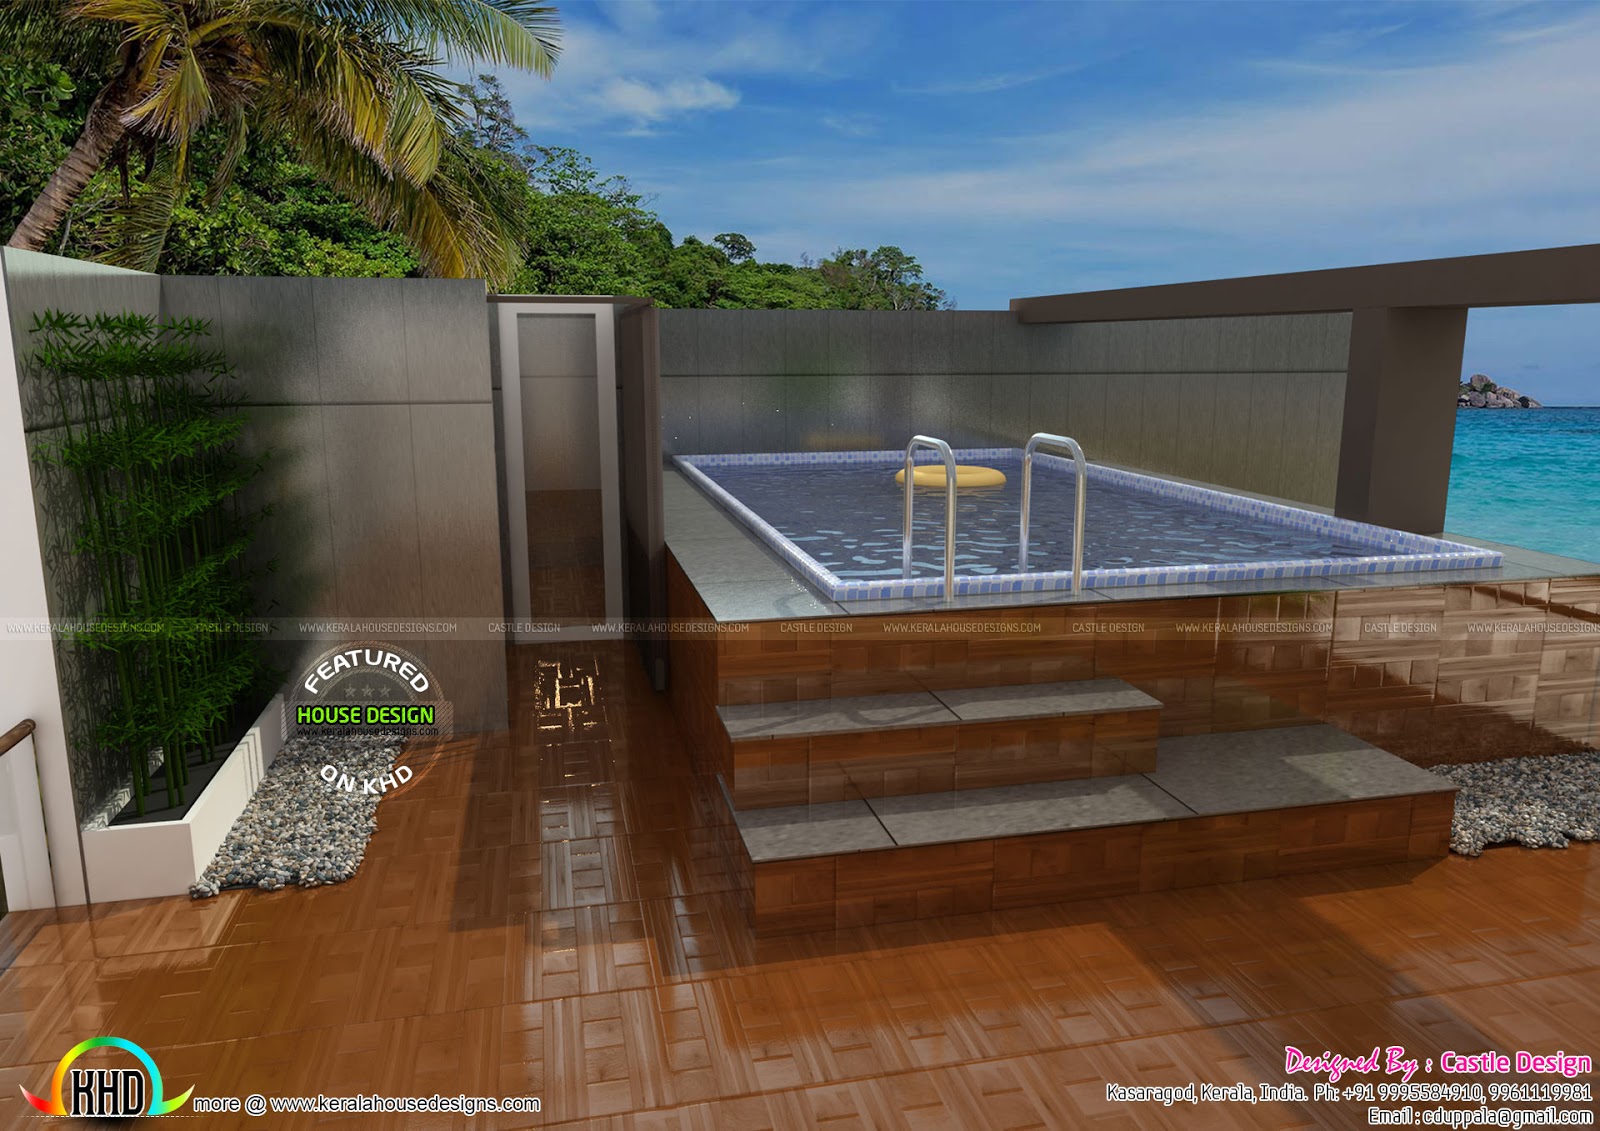  House  with terrace swimming  pool  Kerala home  design  and 